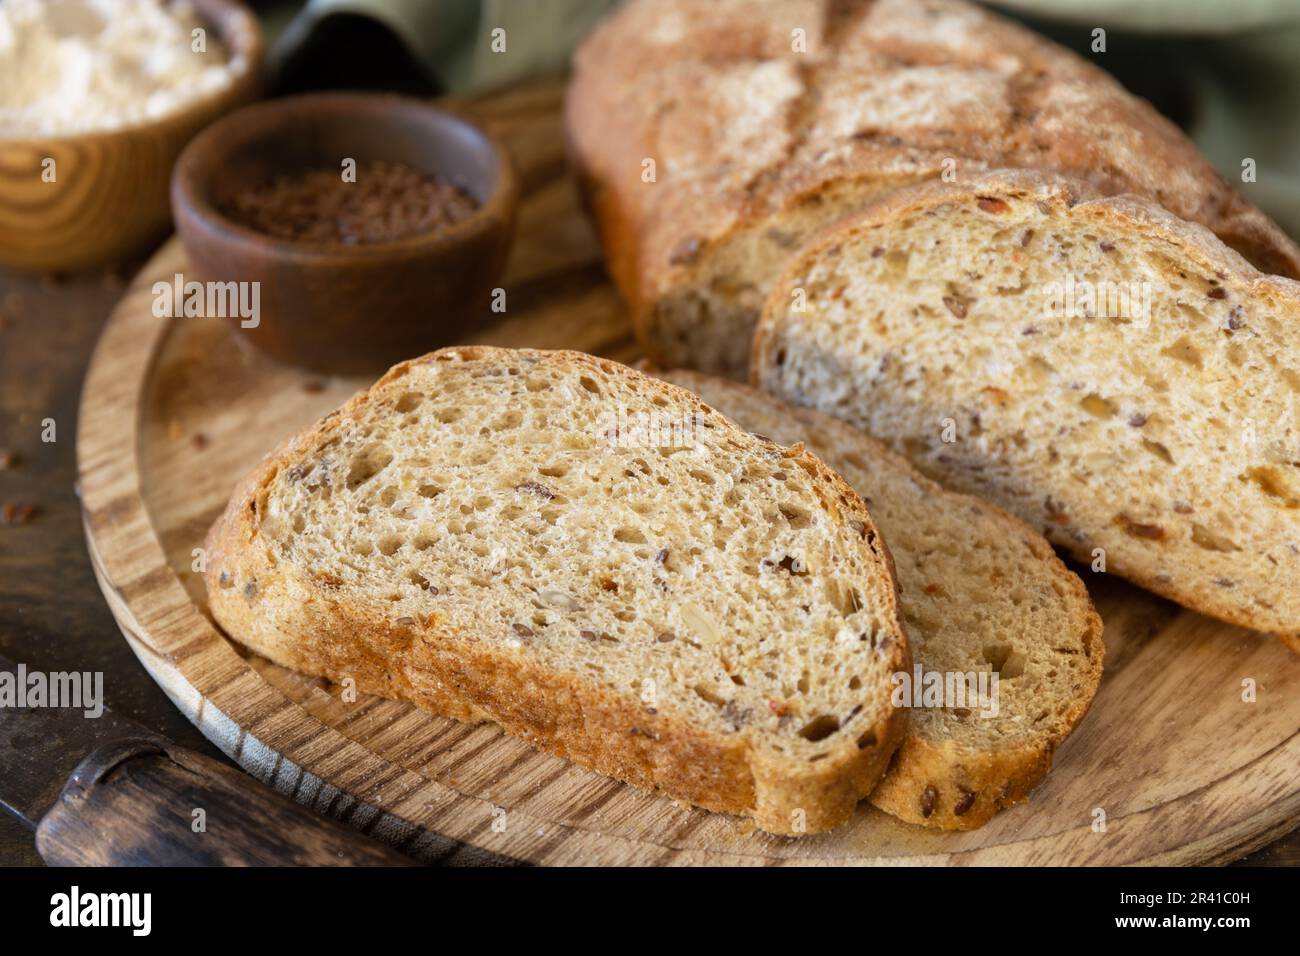 Bread from whole wheat grains, wheat bran, seeds, bio-ingredients over rustic table background, healthy lifestyle. Stock Photo